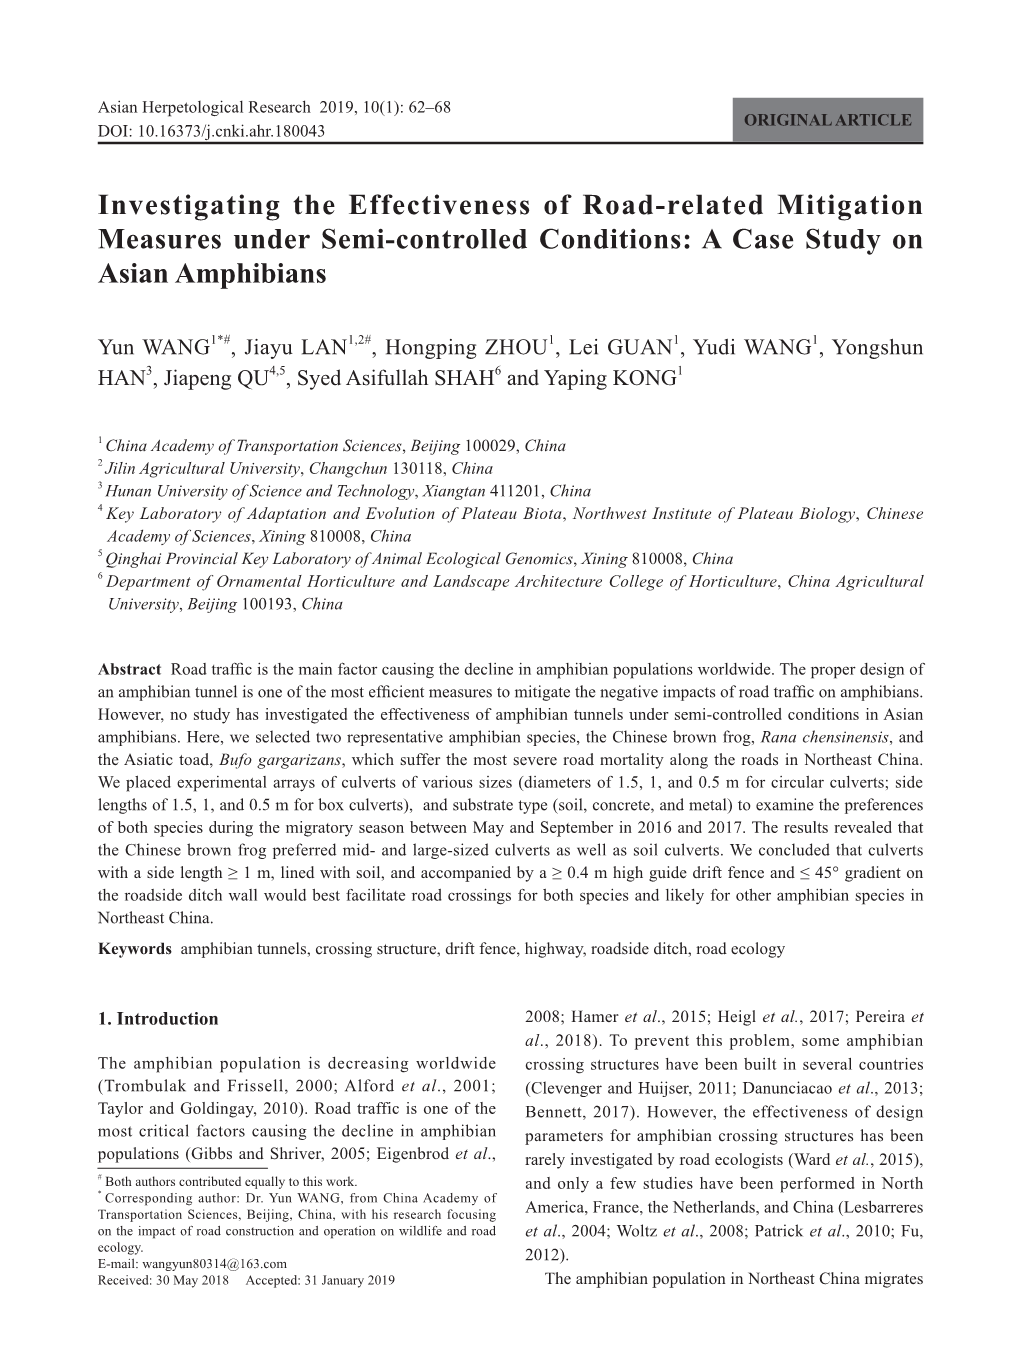 Investigating the Effectiveness of Road-Related Mitigation Measures Under Semi-Controlled Conditions: a Case Study on Asian Amphibians